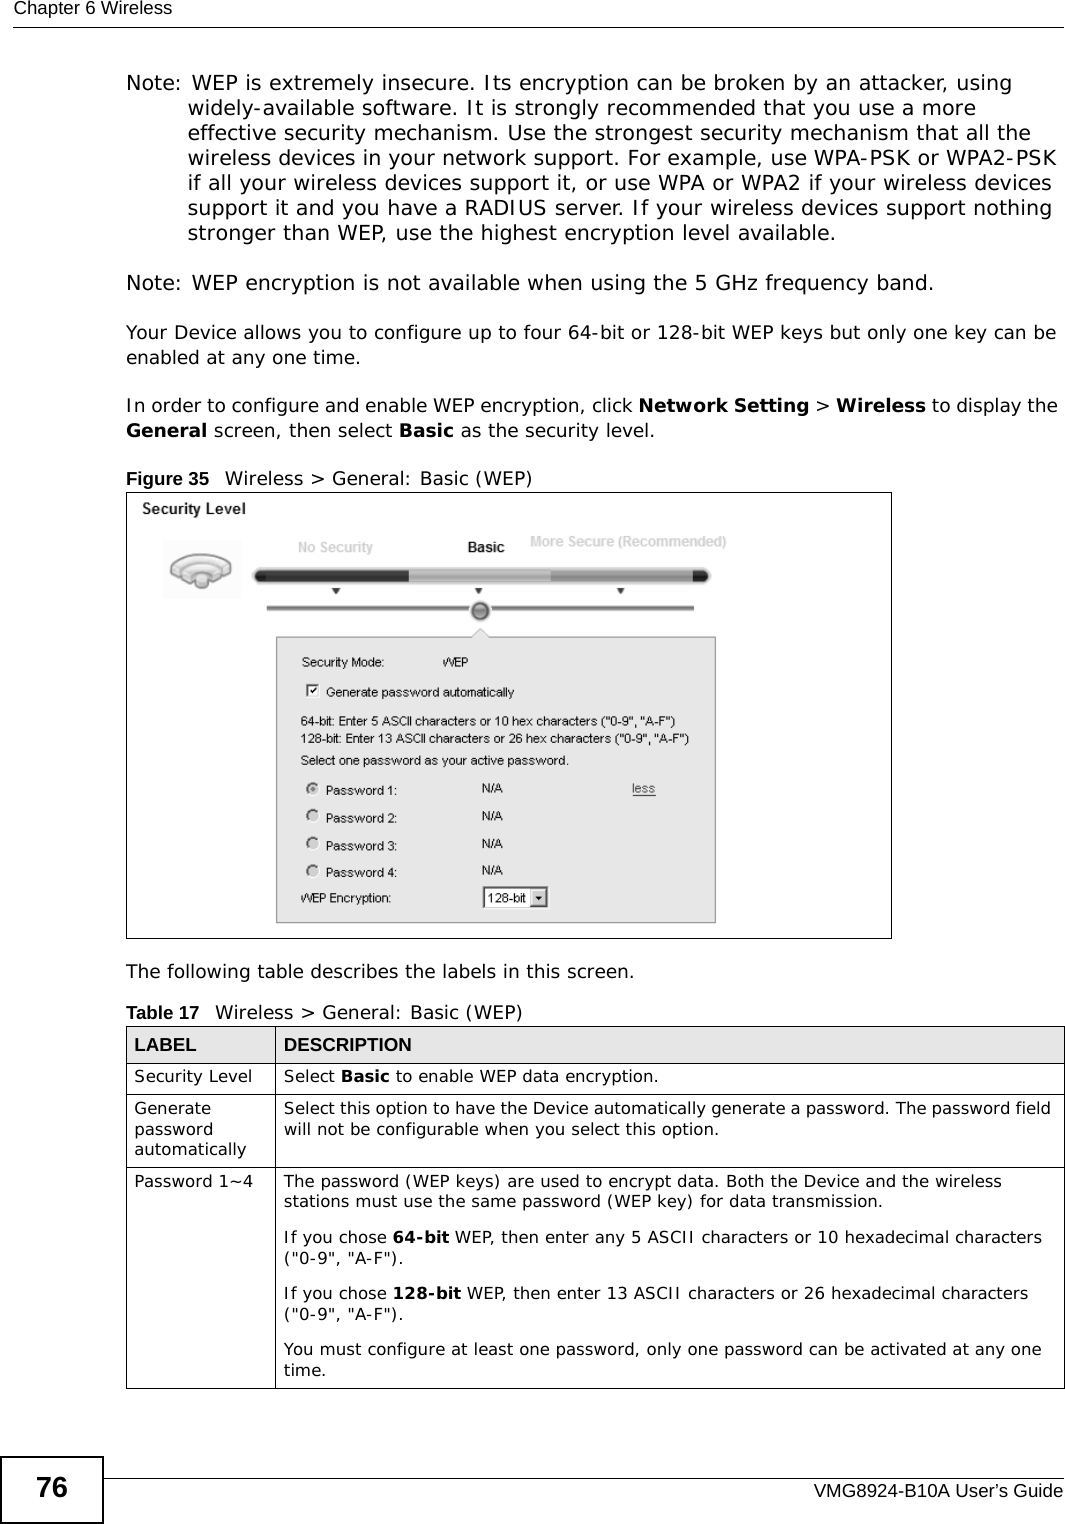 Chapter 6 WirelessVMG8924-B10A User’s Guide76Note: WEP is extremely insecure. Its encryption can be broken by an attacker, using widely-available software. It is strongly recommended that you use a more effective security mechanism. Use the strongest security mechanism that all the wireless devices in your network support. For example, use WPA-PSK or WPA2-PSK if all your wireless devices support it, or use WPA or WPA2 if your wireless devices support it and you have a RADIUS server. If your wireless devices support nothing stronger than WEP, use the highest encryption level available.Note: WEP encryption is not available when using the 5 GHz frequency band.Your Device allows you to configure up to four 64-bit or 128-bit WEP keys but only one key can be enabled at any one time.In order to configure and enable WEP encryption, click Network Setting &gt; Wireless to display the General screen, then select Basic as the security level.Figure 35   Wireless &gt; General: Basic (WEP) The following table describes the labels in this screen. Table 17   Wireless &gt; General: Basic (WEP)LABEL DESCRIPTIONSecurity Level Select Basic to enable WEP data encryption.Generate password automatically Select this option to have the Device automatically generate a password. The password field will not be configurable when you select this option.Password 1~4 The password (WEP keys) are used to encrypt data. Both the Device and the wireless stations must use the same password (WEP key) for data transmission.If you chose 64-bit WEP, then enter any 5 ASCII characters or 10 hexadecimal characters (&quot;0-9&quot;, &quot;A-F&quot;).If you chose 128-bit WEP, then enter 13 ASCII characters or 26 hexadecimal characters (&quot;0-9&quot;, &quot;A-F&quot;). You must configure at least one password, only one password can be activated at any one time. 